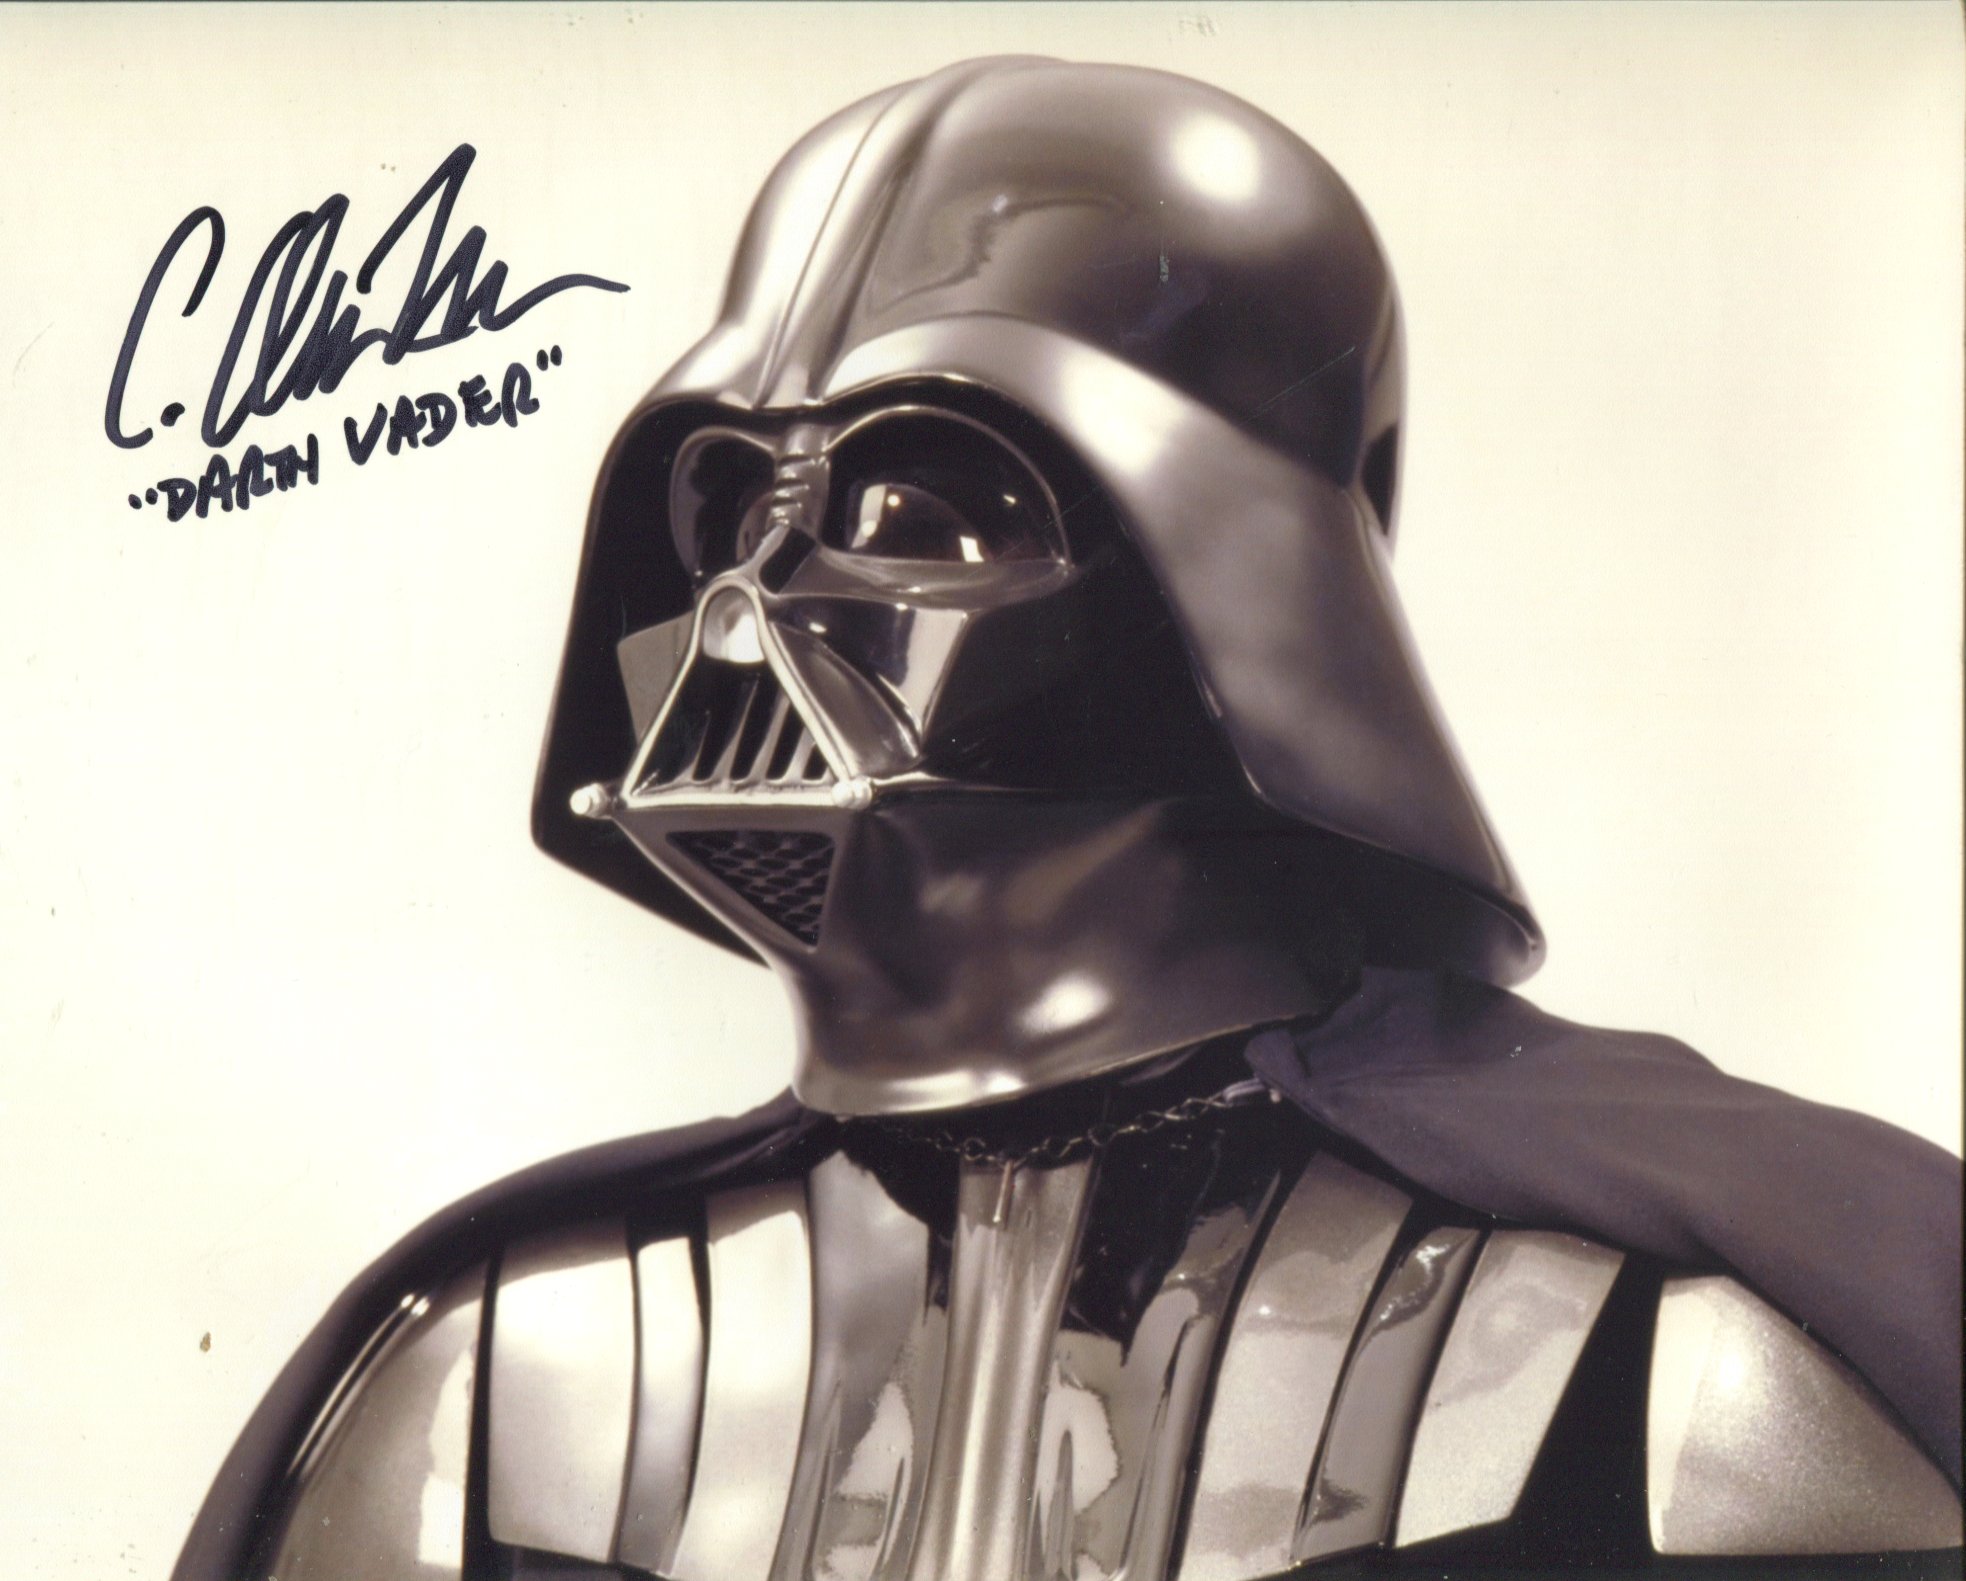 Star Wars The Phantom Menace Darth Vader body double actor C Andrew Nelson signed 8x10 photo. Good